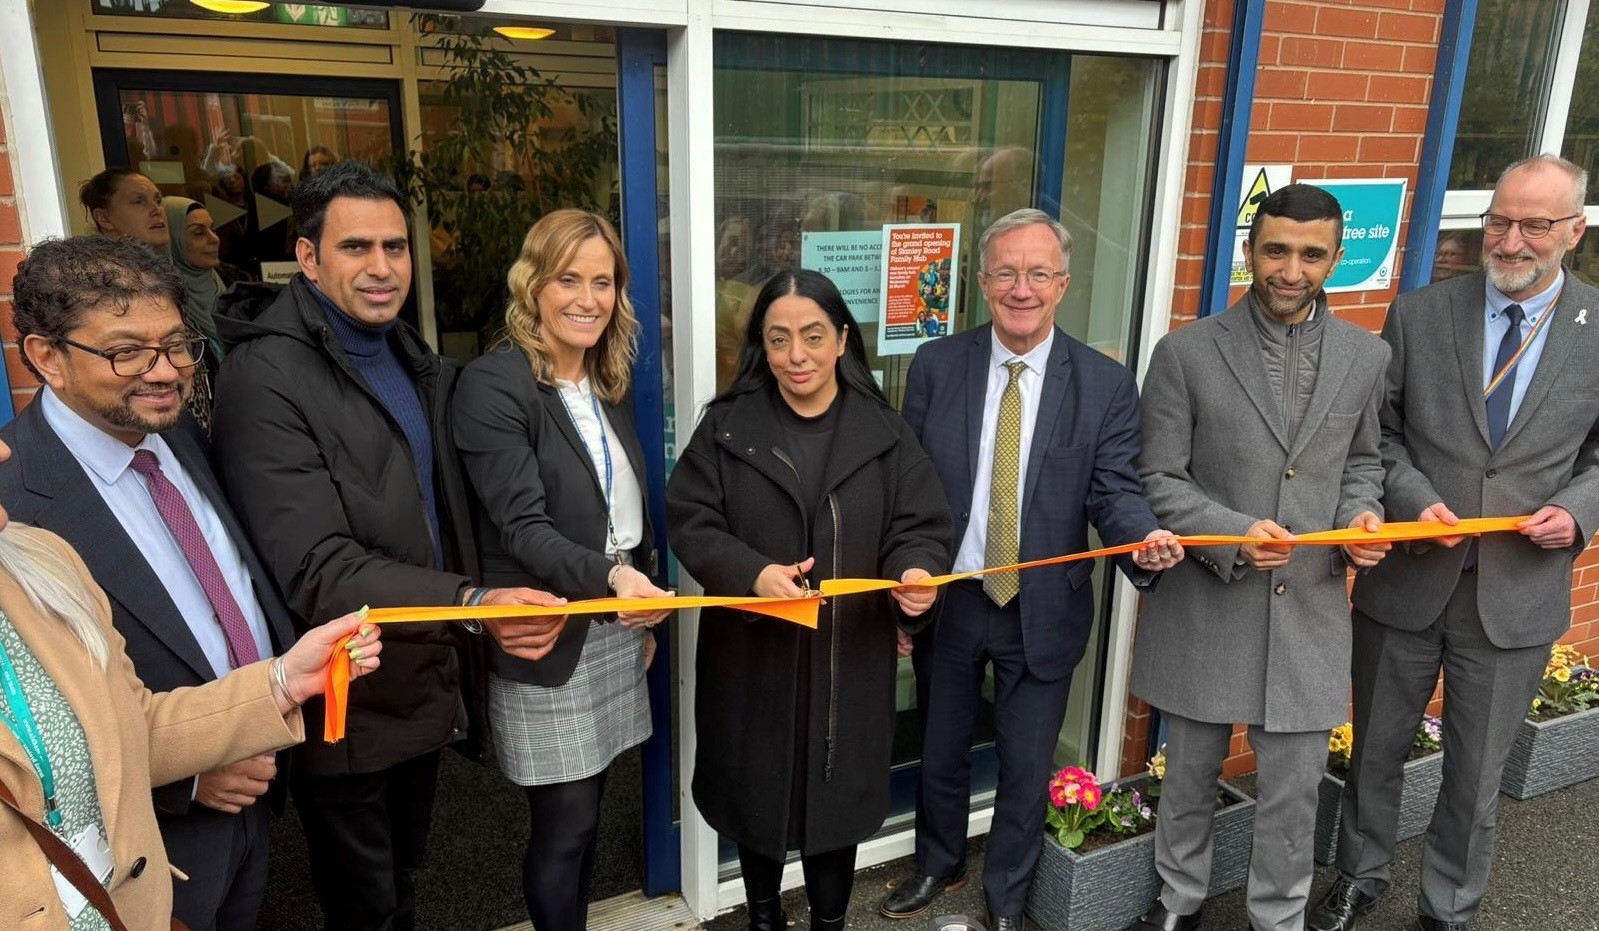 The Council Leader Arooj Shah cutting the ribbon at the opening of Stanley Road Family Hub